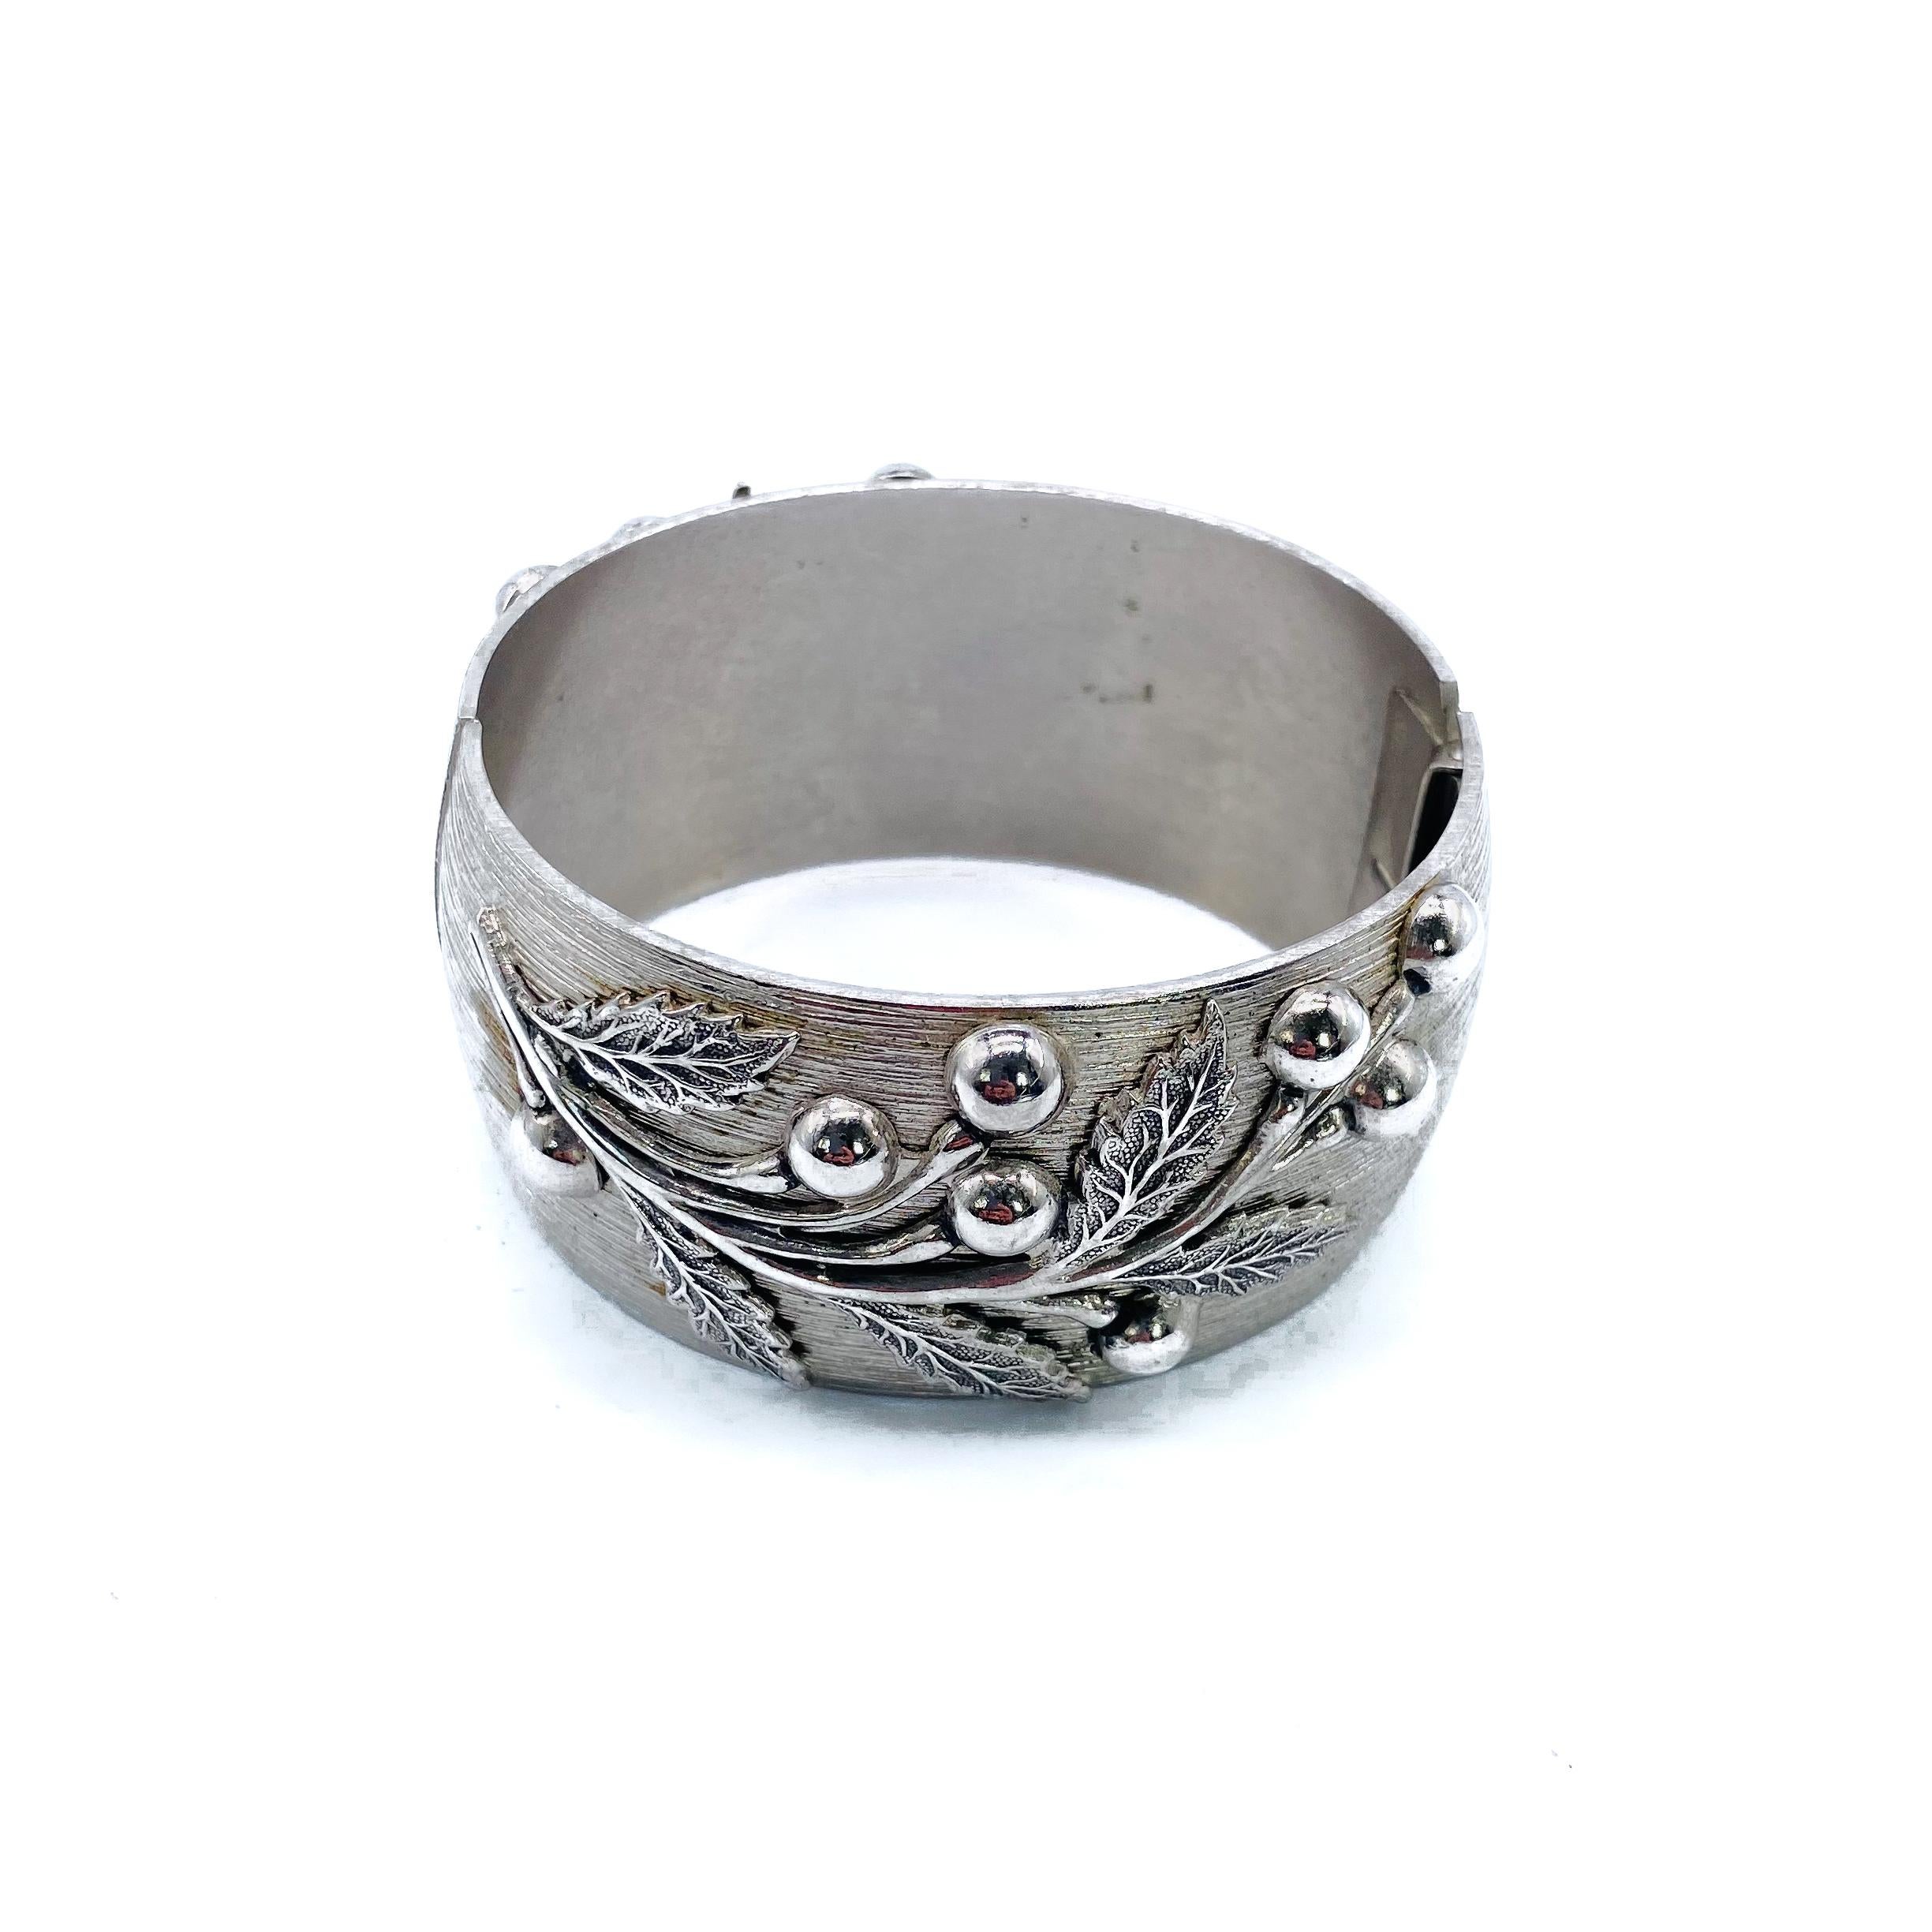 Whiting & Davis 1970s Vintage Cuff Bracelet 

This beautiful silver plated cuff bracelet is from Whiting & Davis, America's oldest costume jeweller. Established in the late 1800s, Whiting & Davis accessories were hugely popular through the